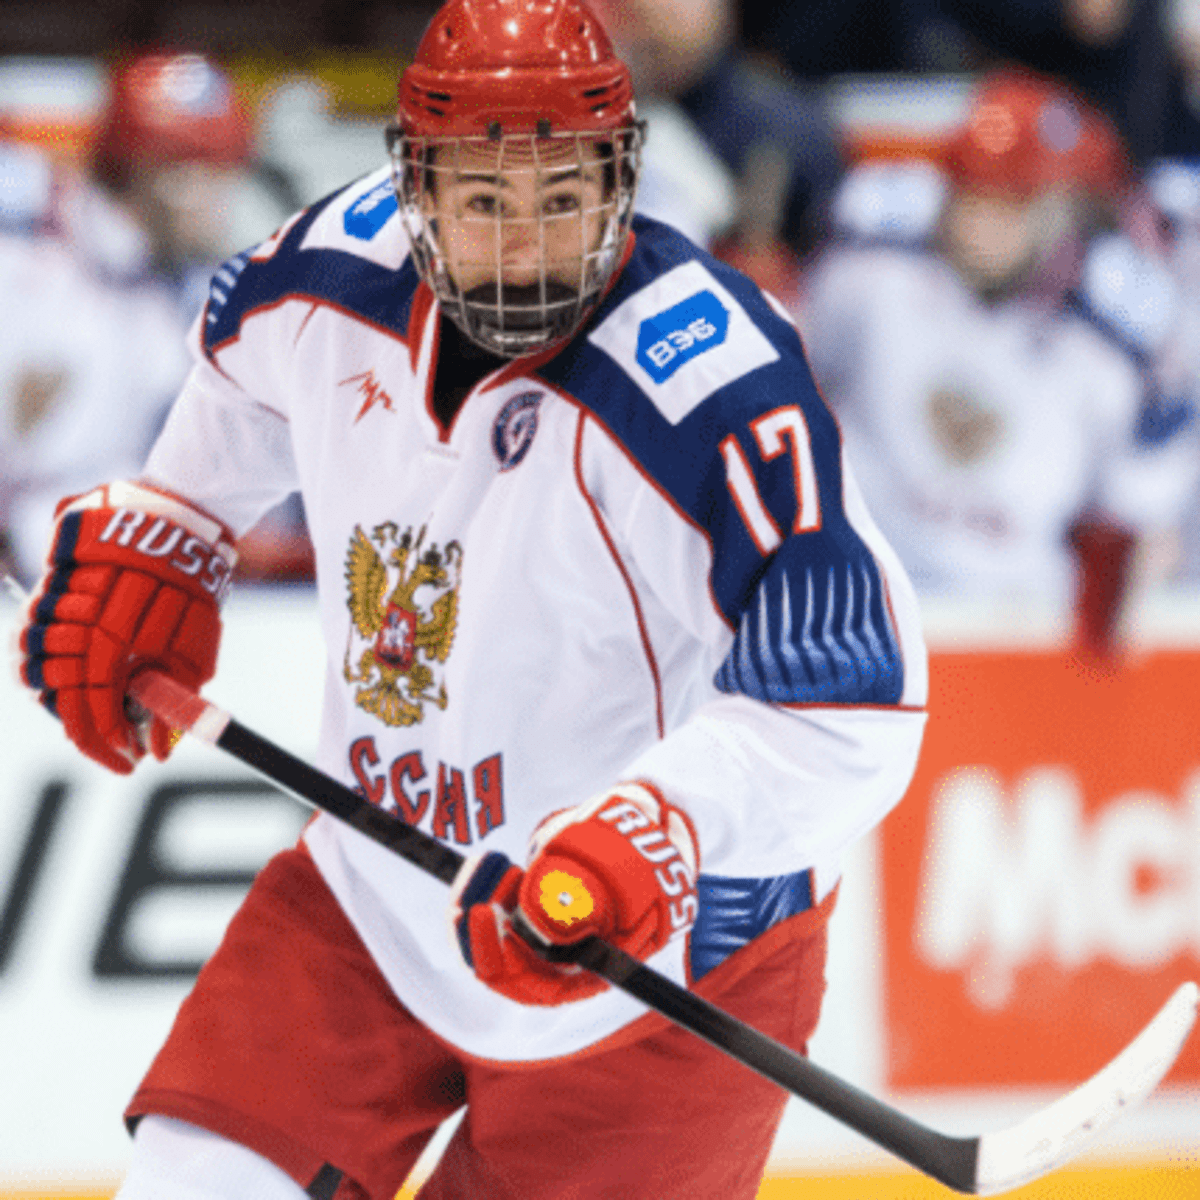 Russia's neutral Olympic hockey jerseys may have leaked, per report 